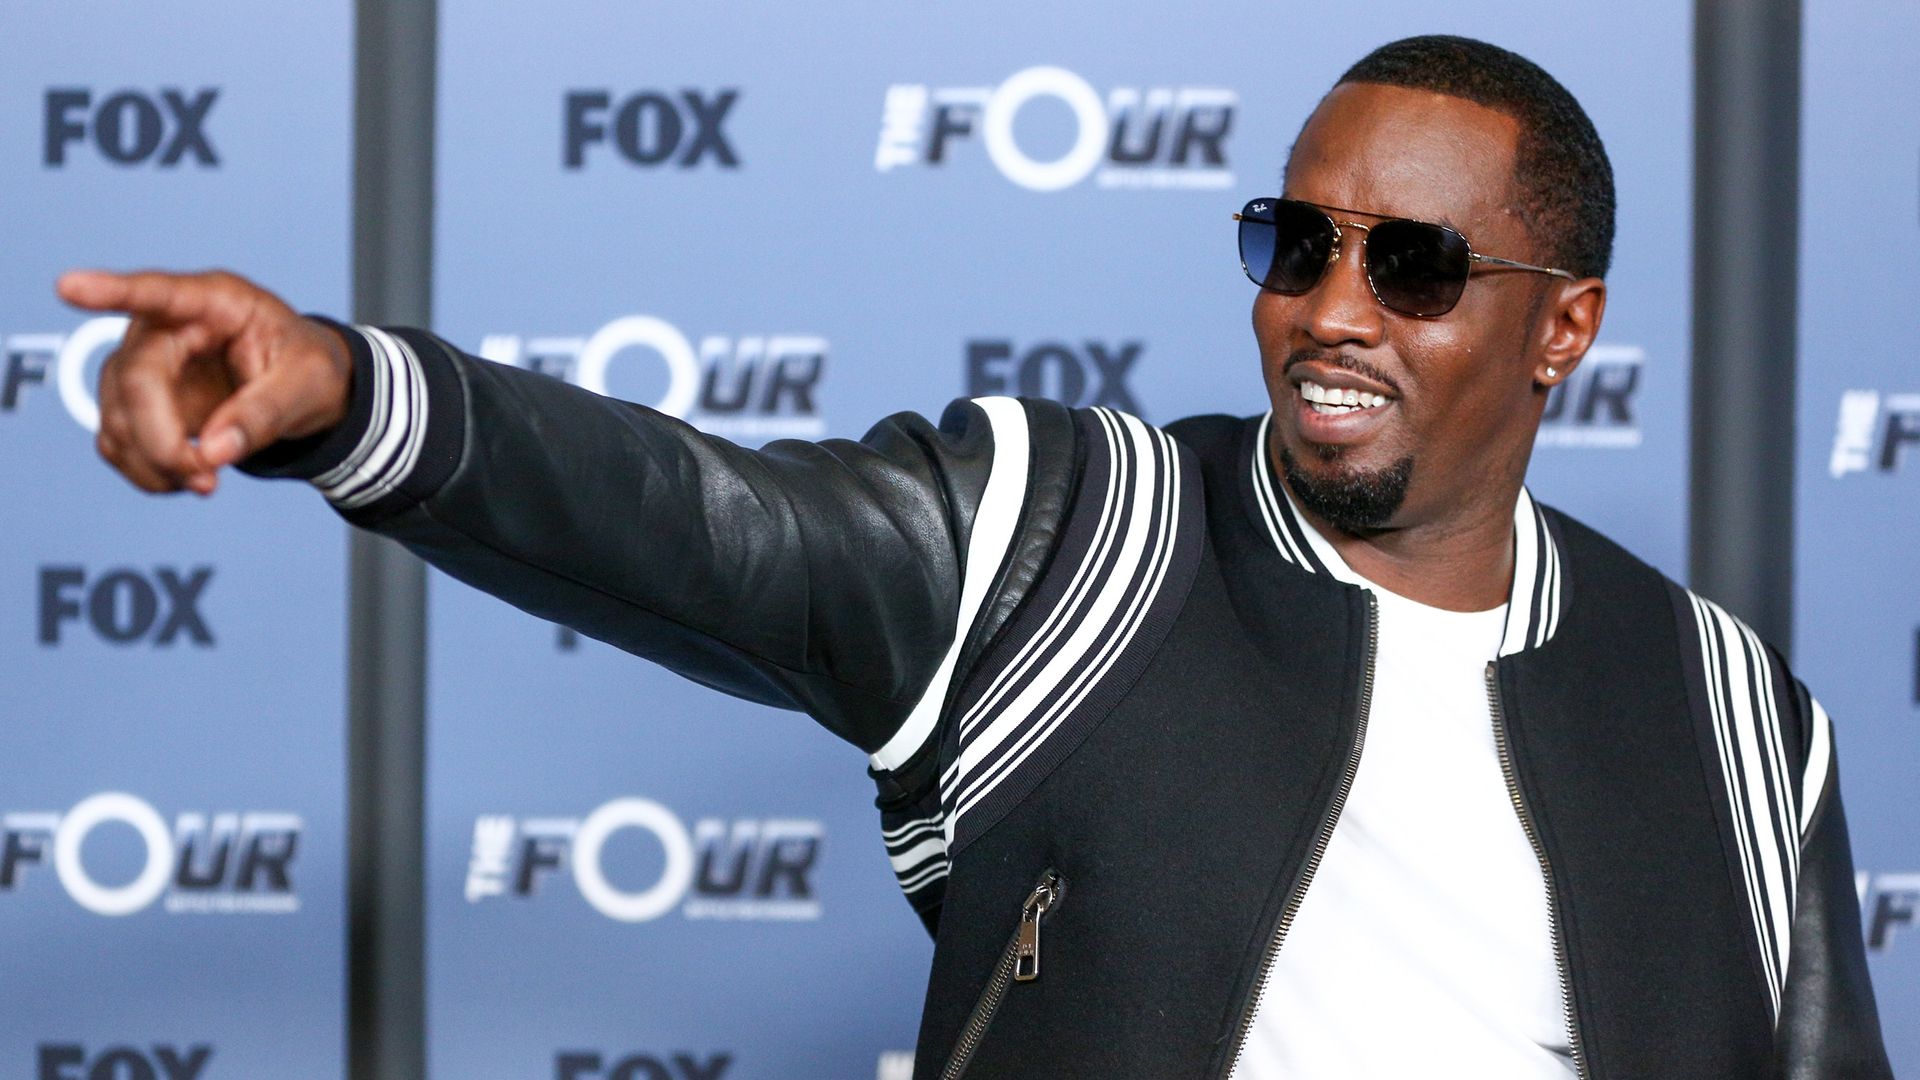 Sean 'Diddy Combs' breaks his silence and says he's a victim of a 'witch hunt' amid shocking claims | HELLO!